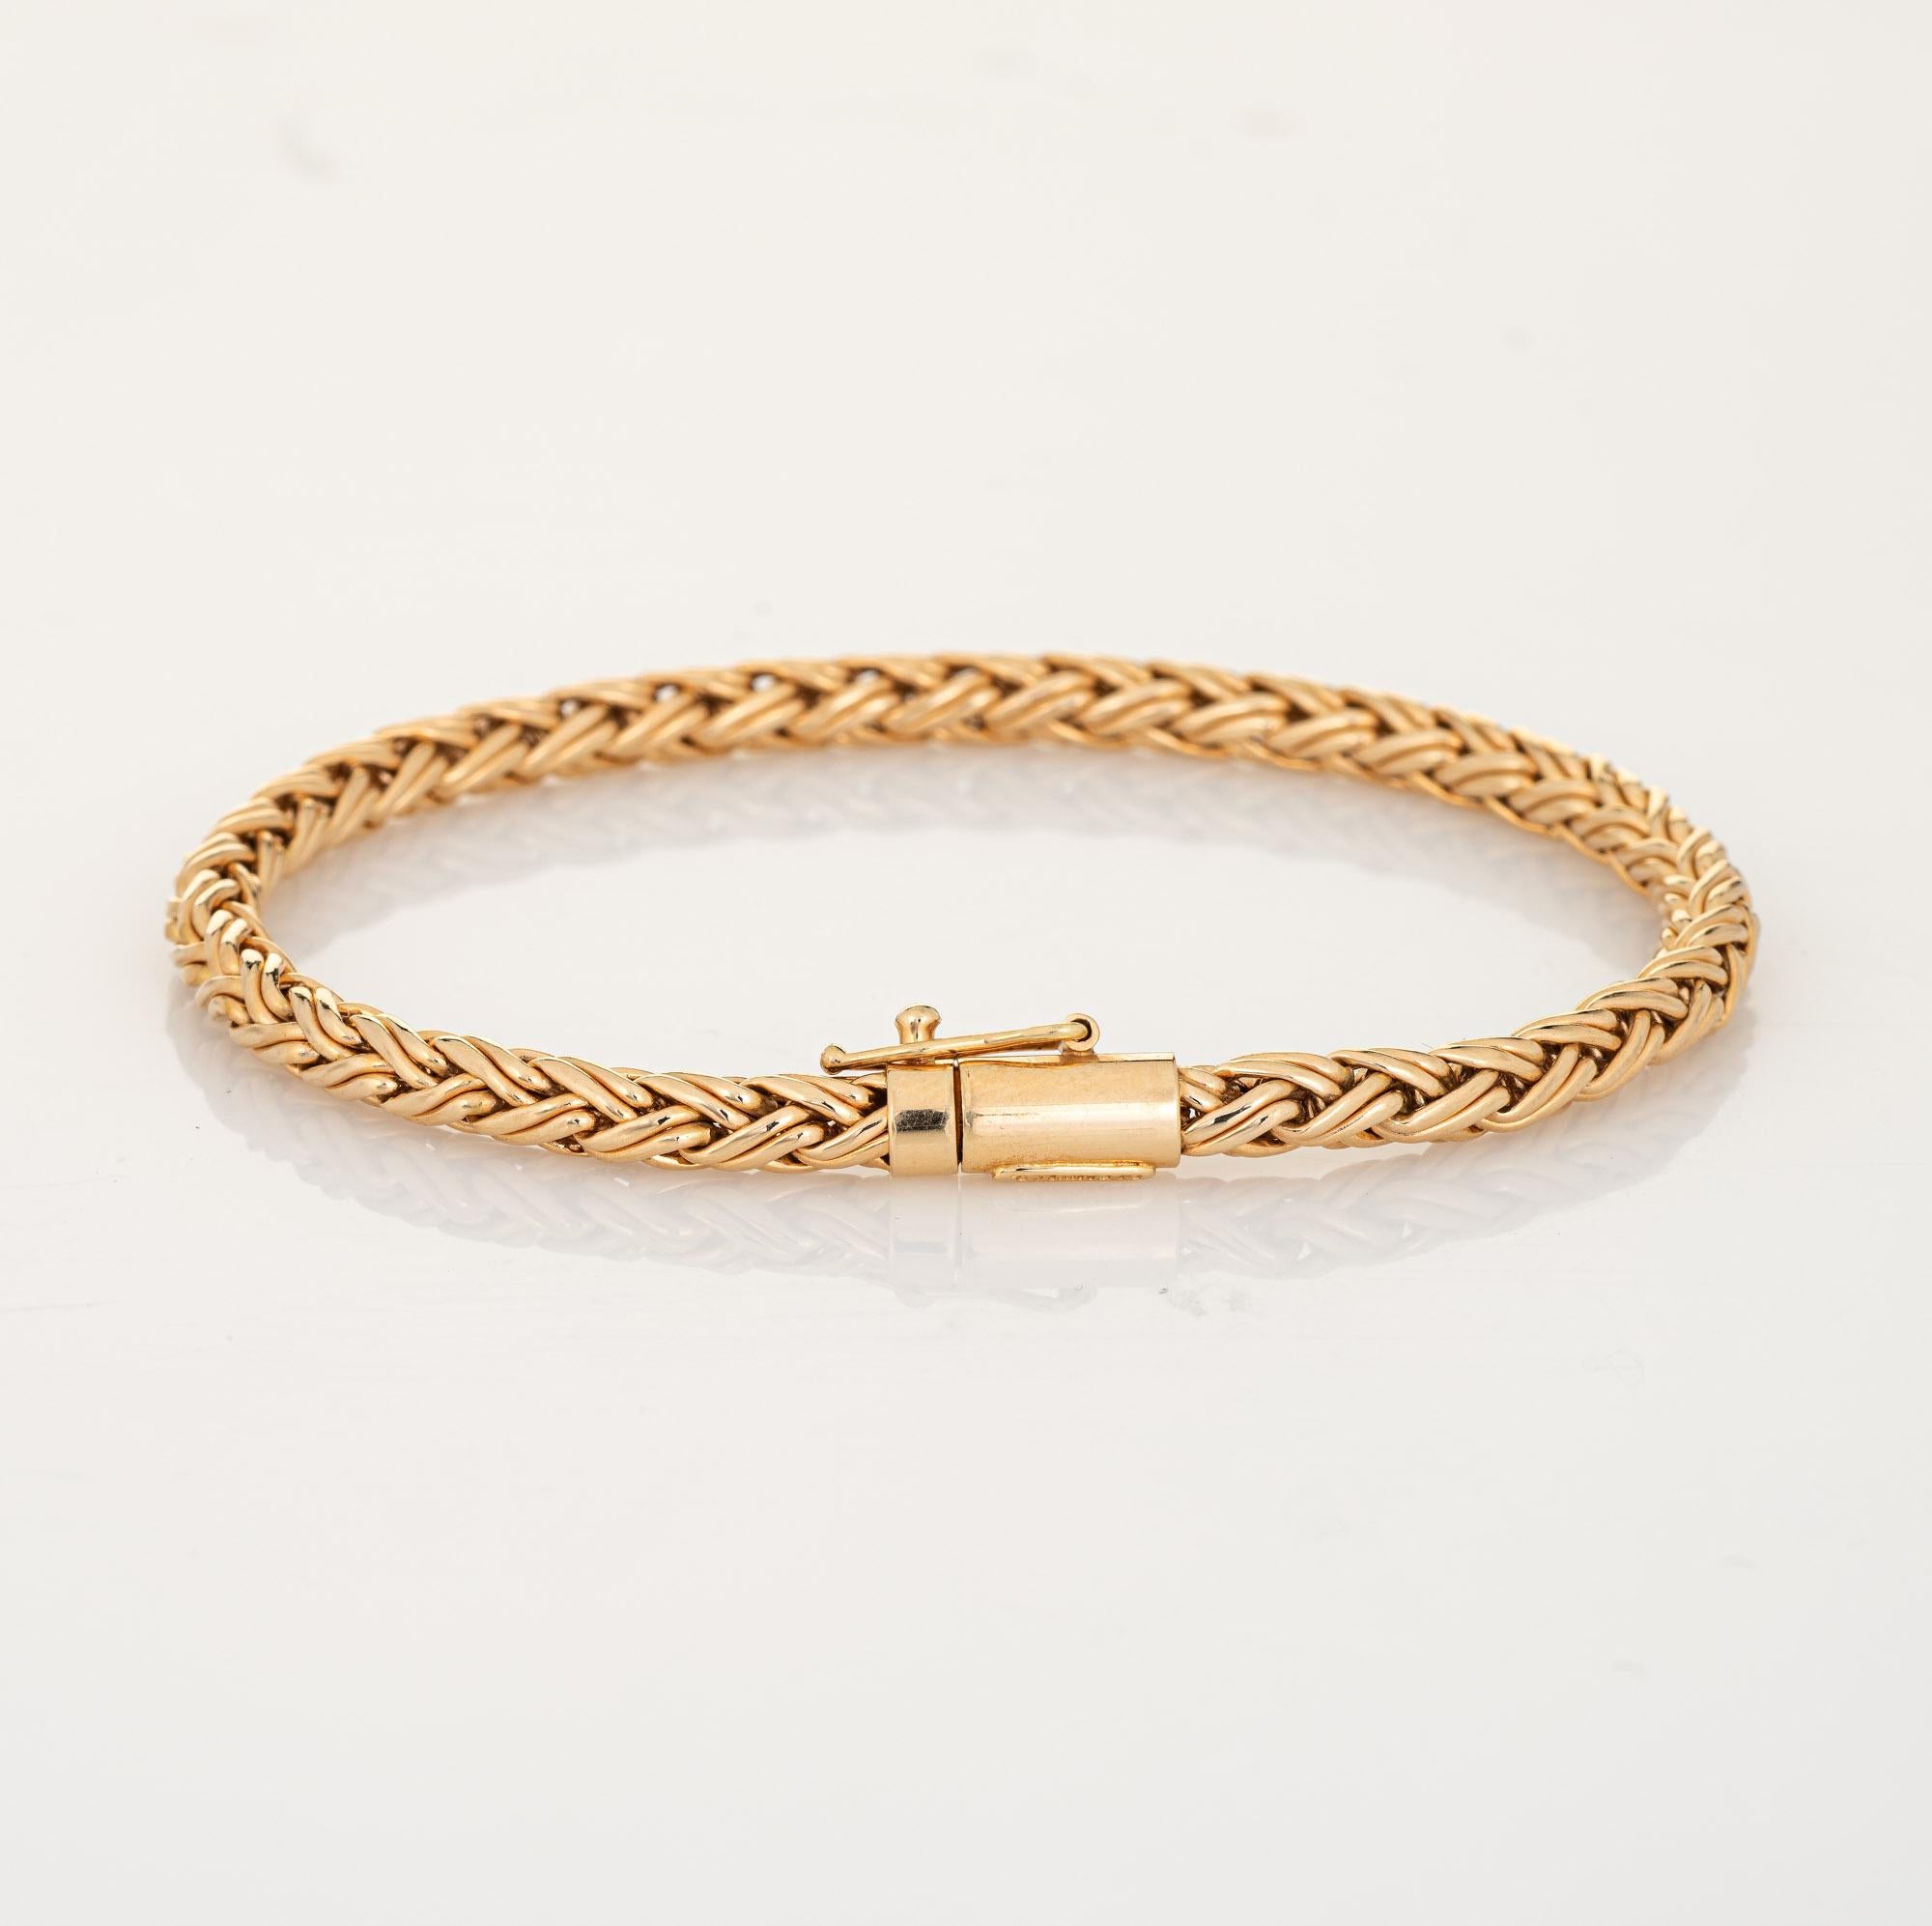 Stylish and finely detailed vintage Tiffany & Co wheat link bracelet, crafted in 14k yellow gold.  

The bracelet features a 4mm wheat link chain, terminating to a slip lock clasp. Measuring 7 1/2 inches in length the bracelet is great worn alone or